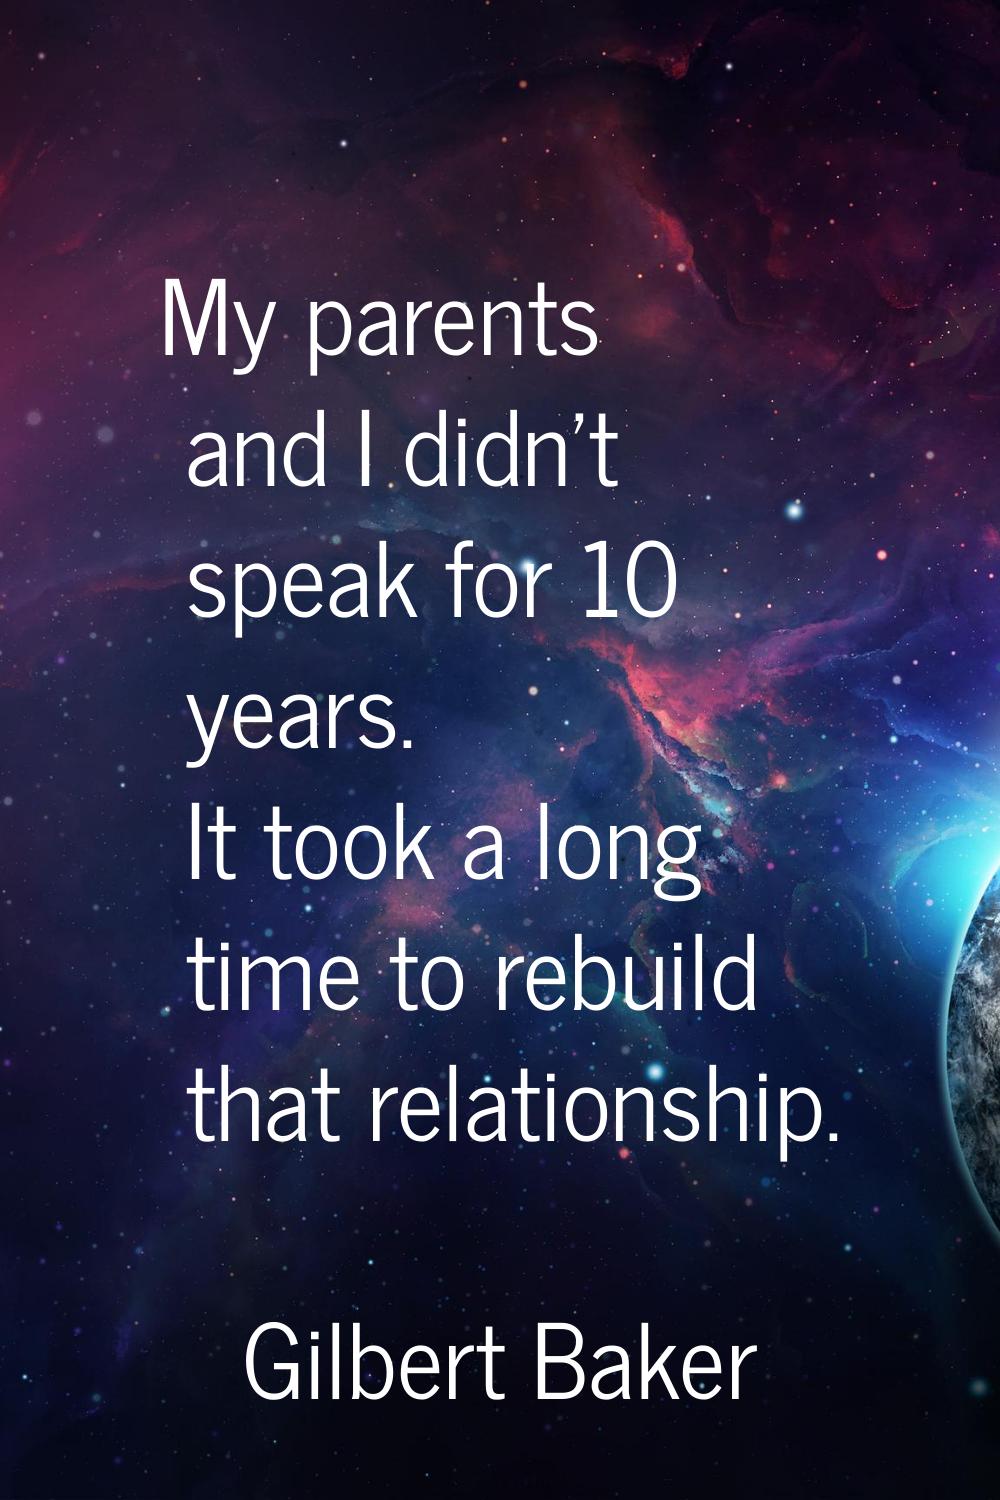 My parents and I didn't speak for 10 years. It took a long time to rebuild that relationship.